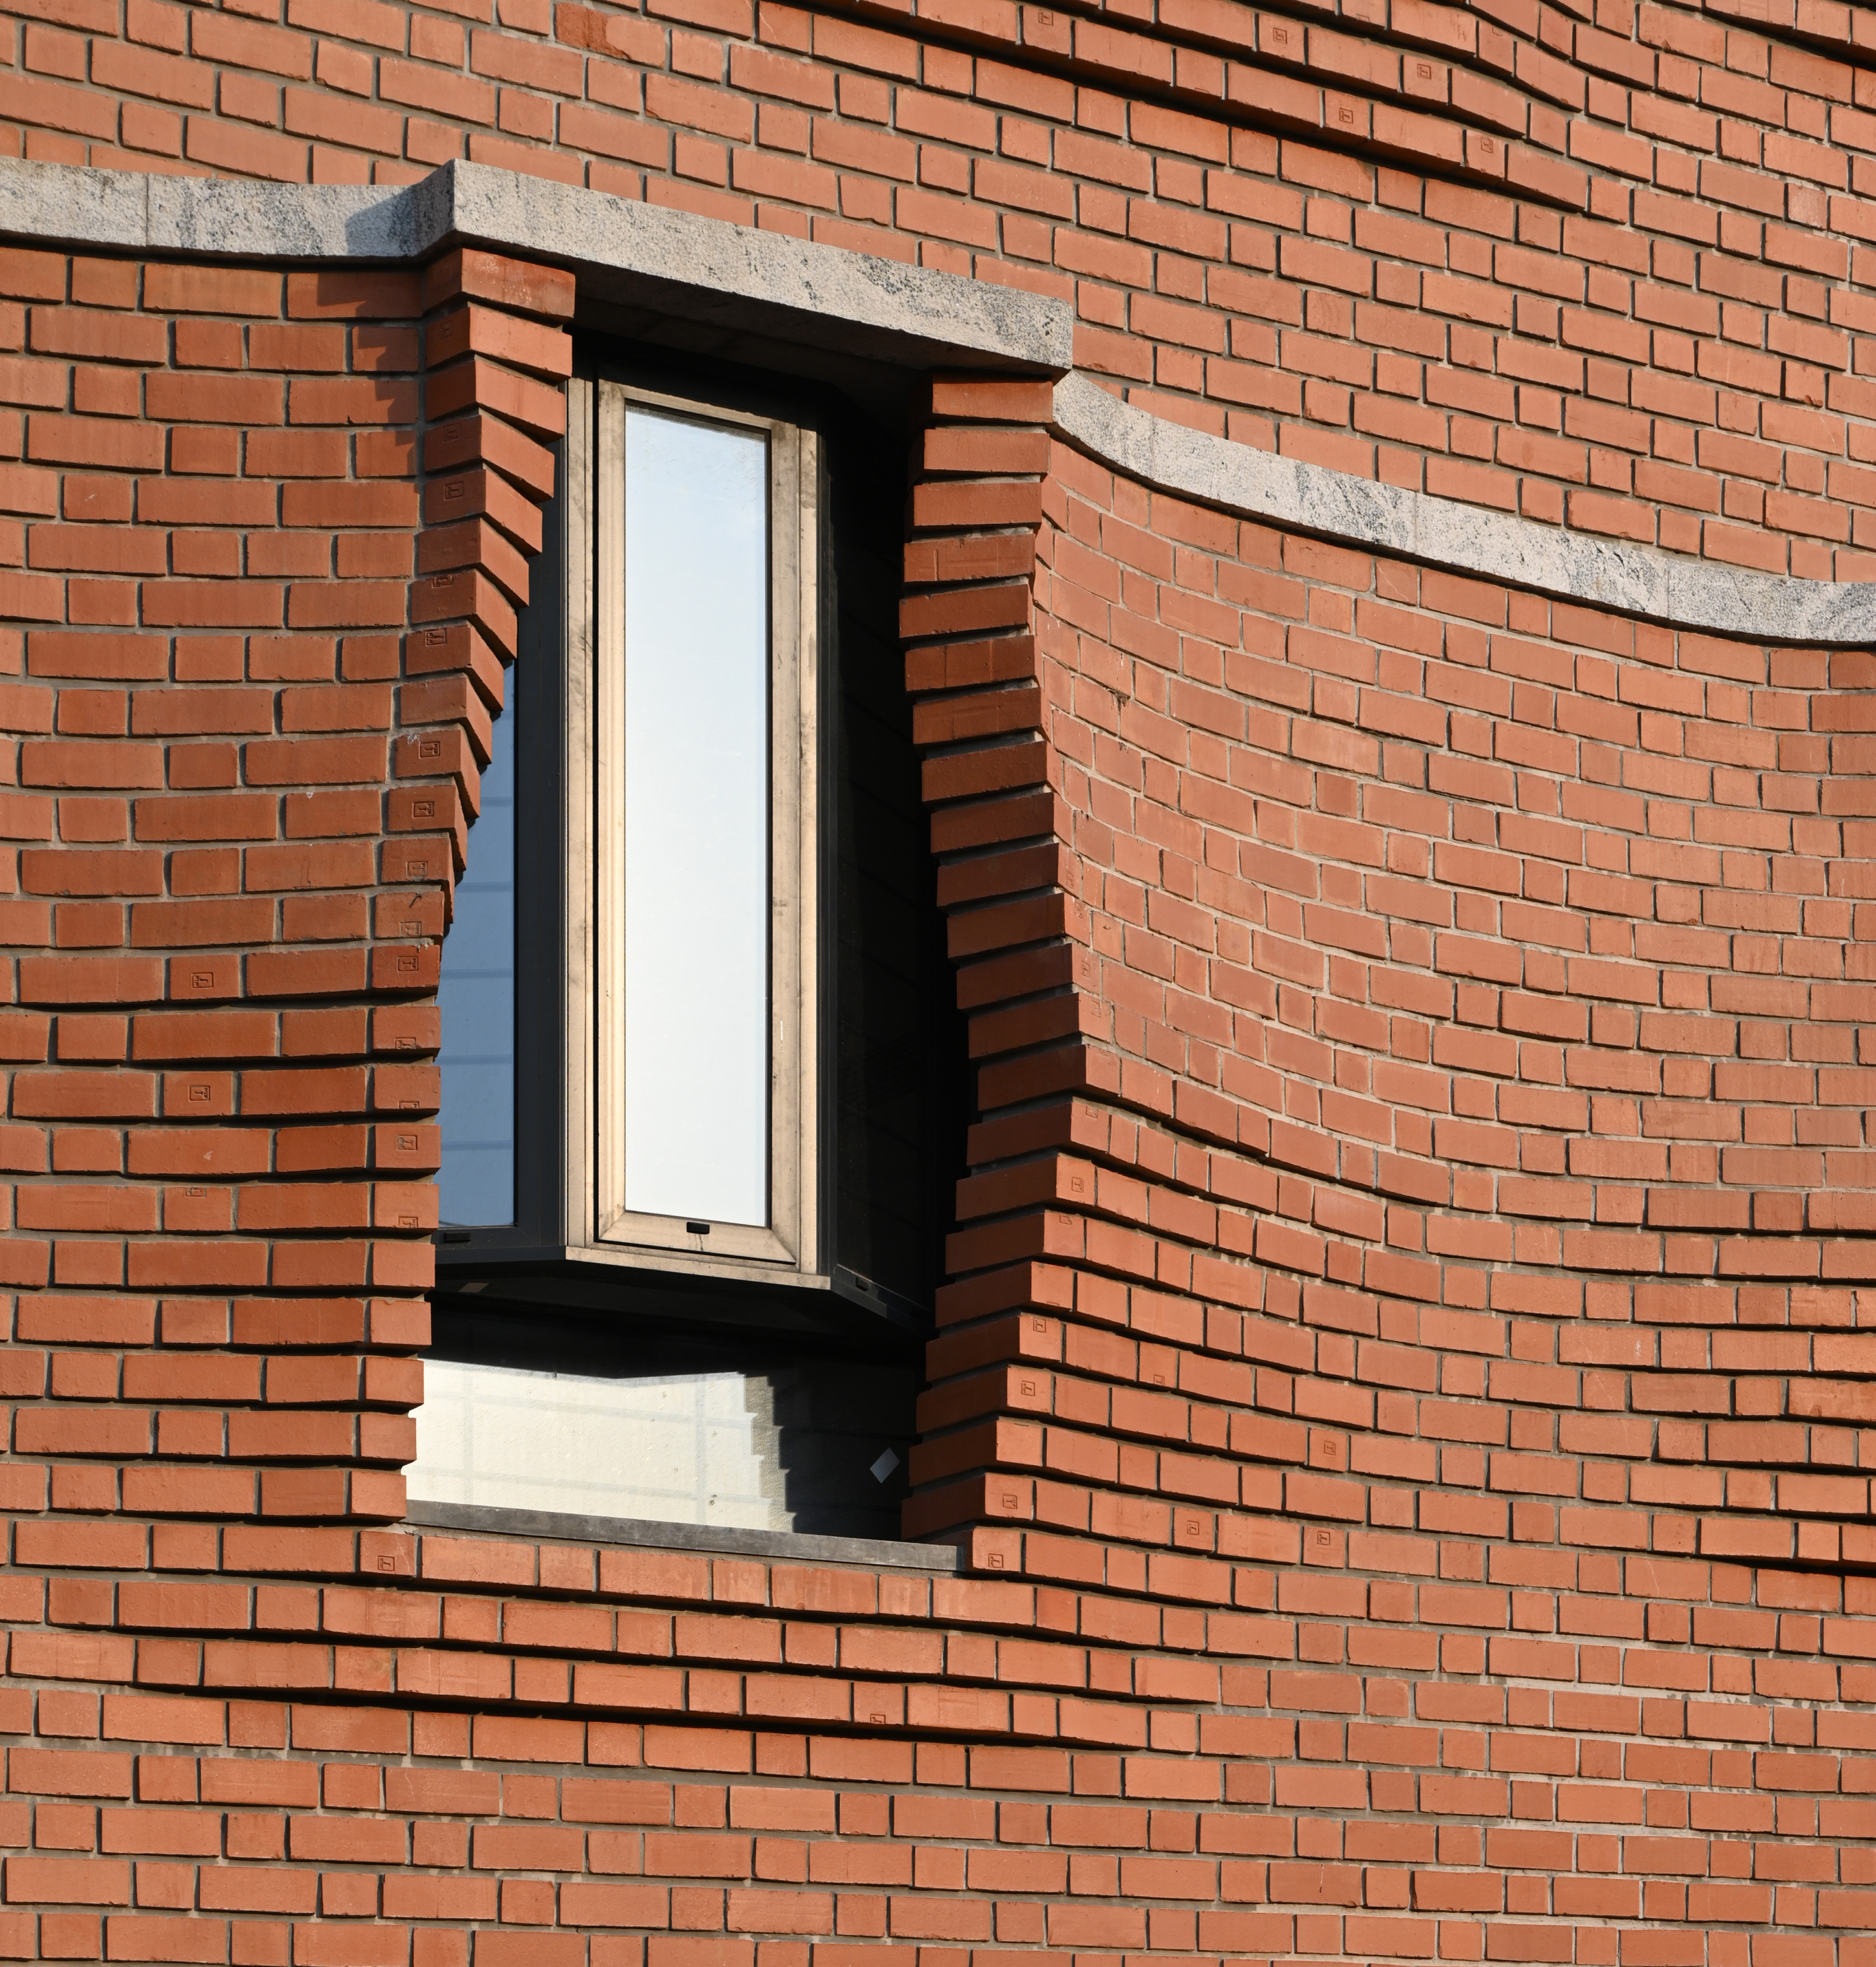 A floating window amid parting brick at the sienna